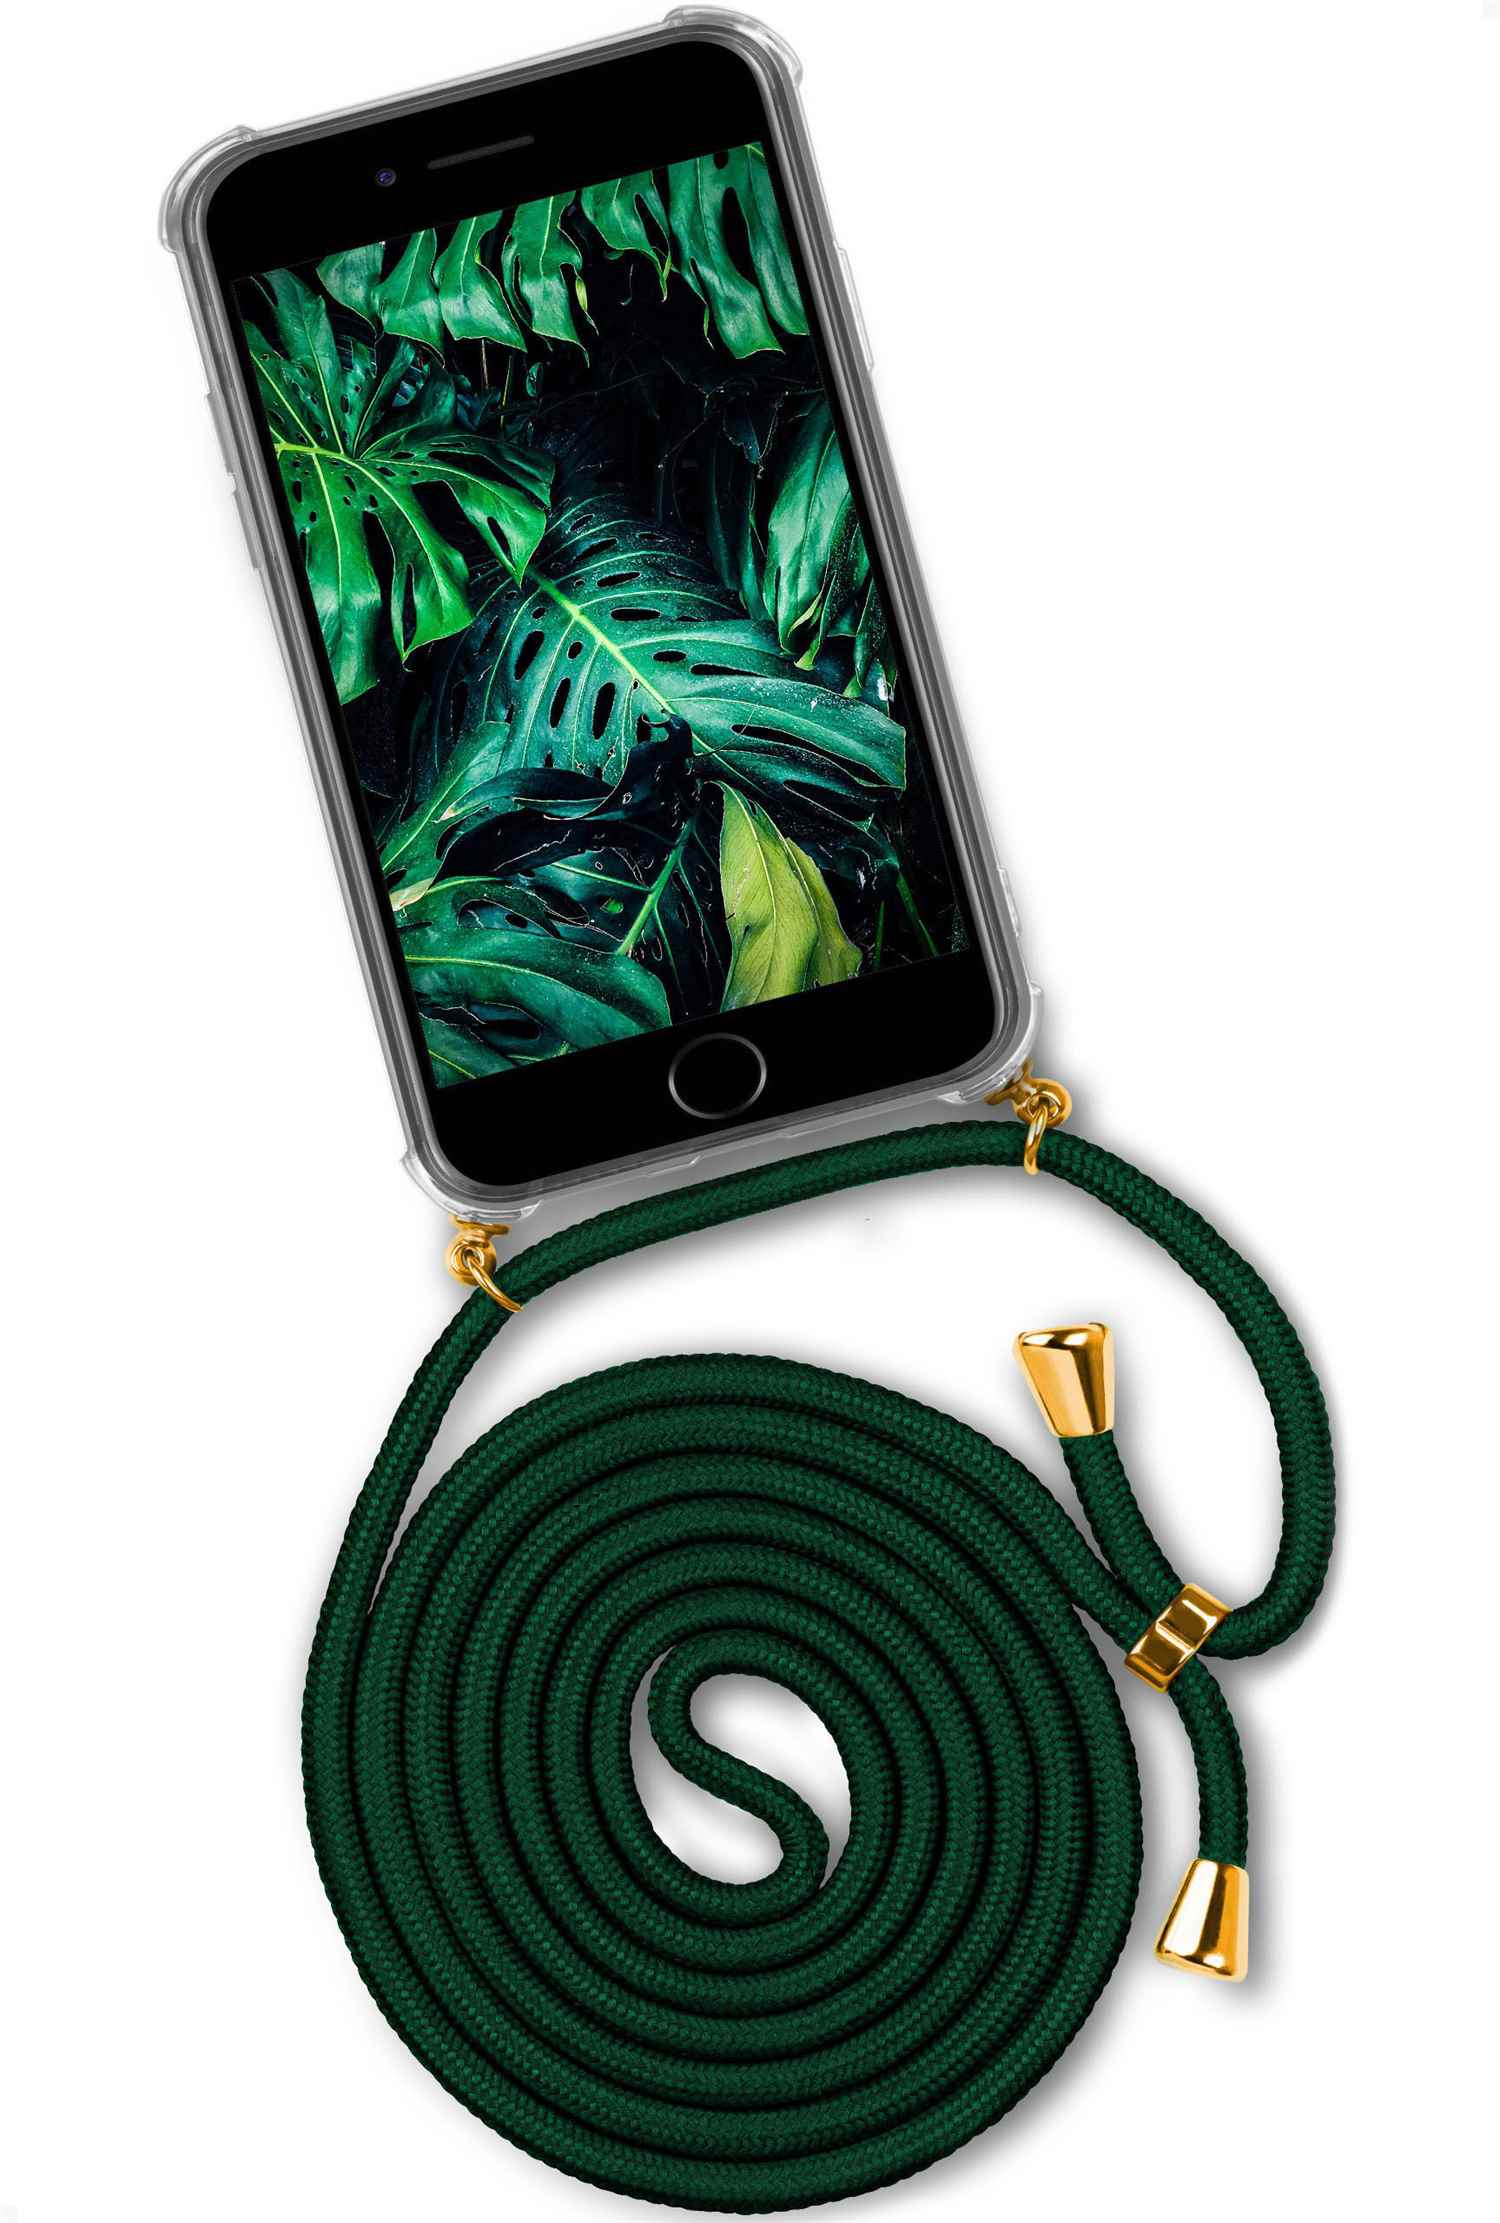 (Gold) ONEFLOW Plus, Deepest Apple, iPhone Case, Twist 6 Jungle Backcover,